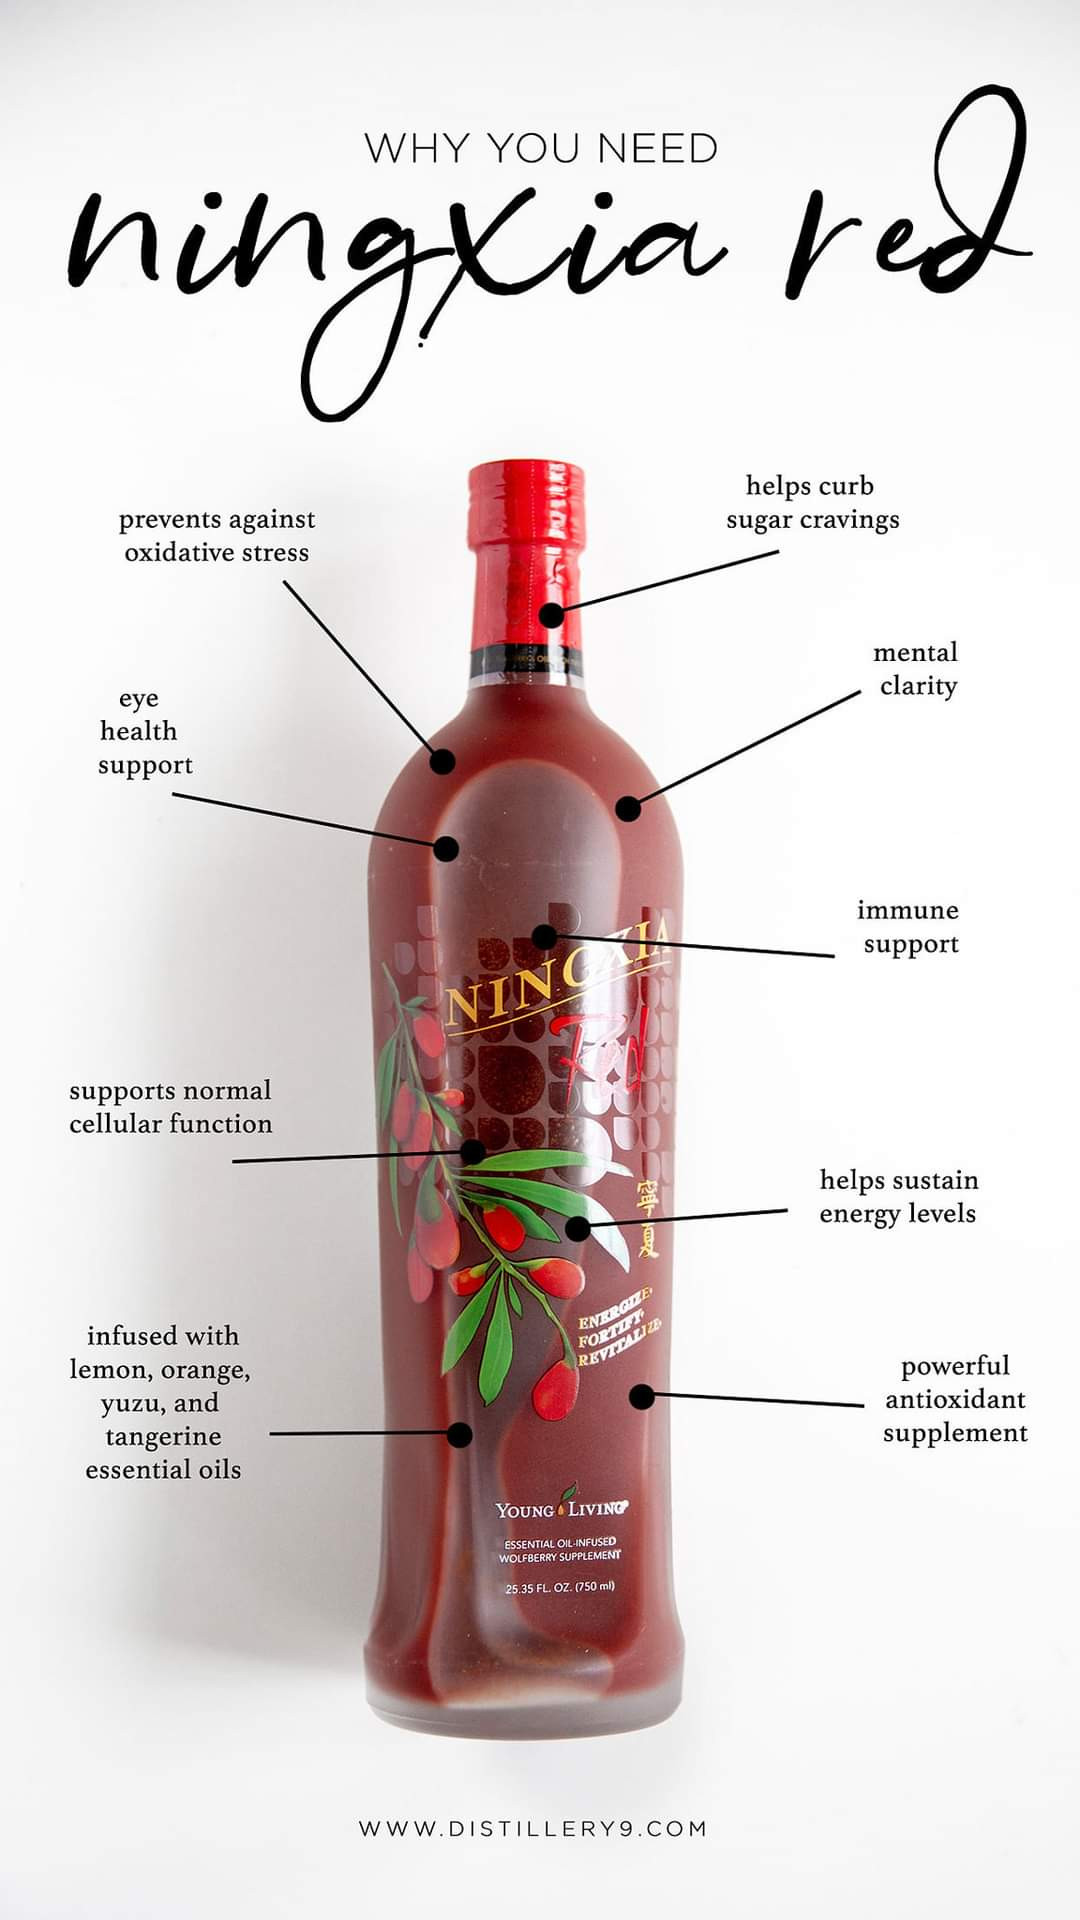 Energy from NingXia 